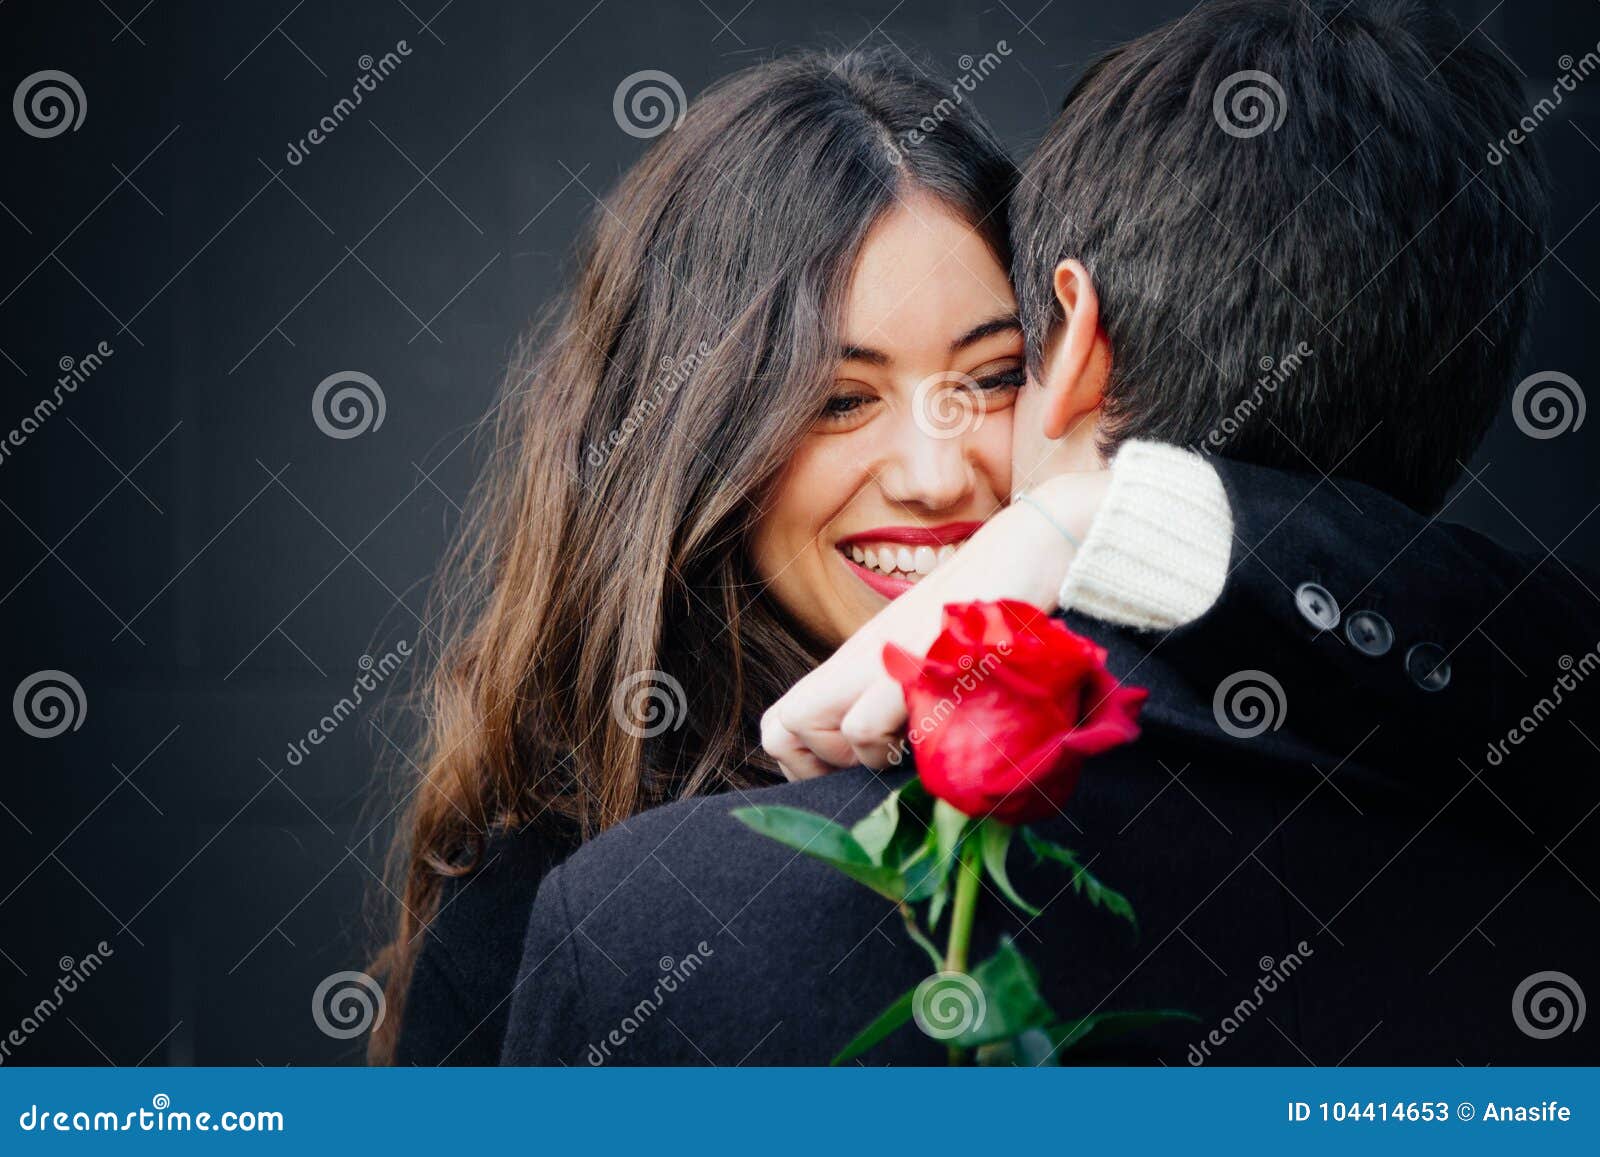 Beautiful Couple in Love with a Rose Stock Image - Image of coat ...